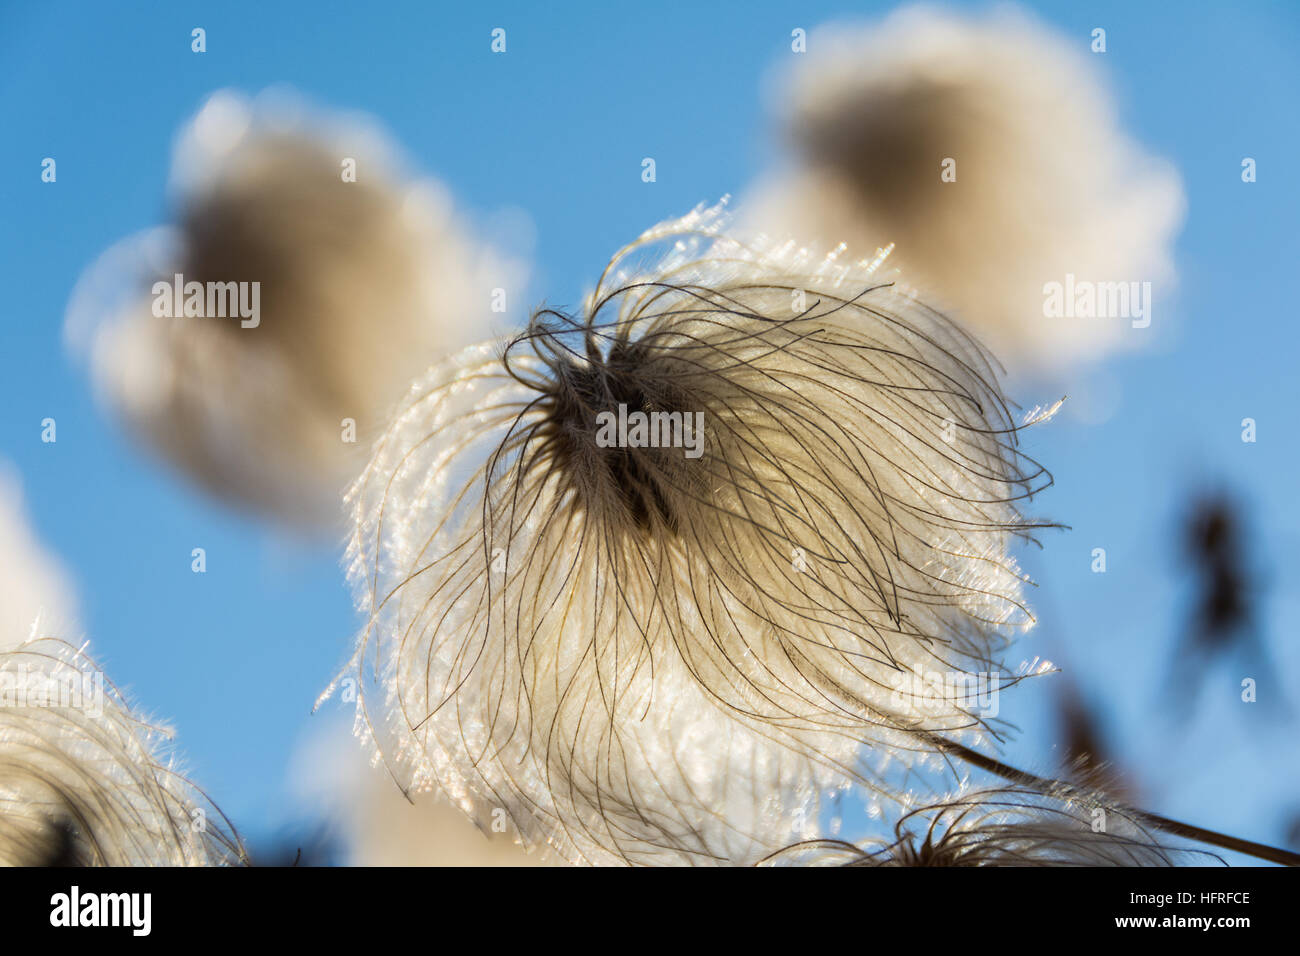 A delicate Clematis Macropetala seed head on a sky blue background Stock Photo